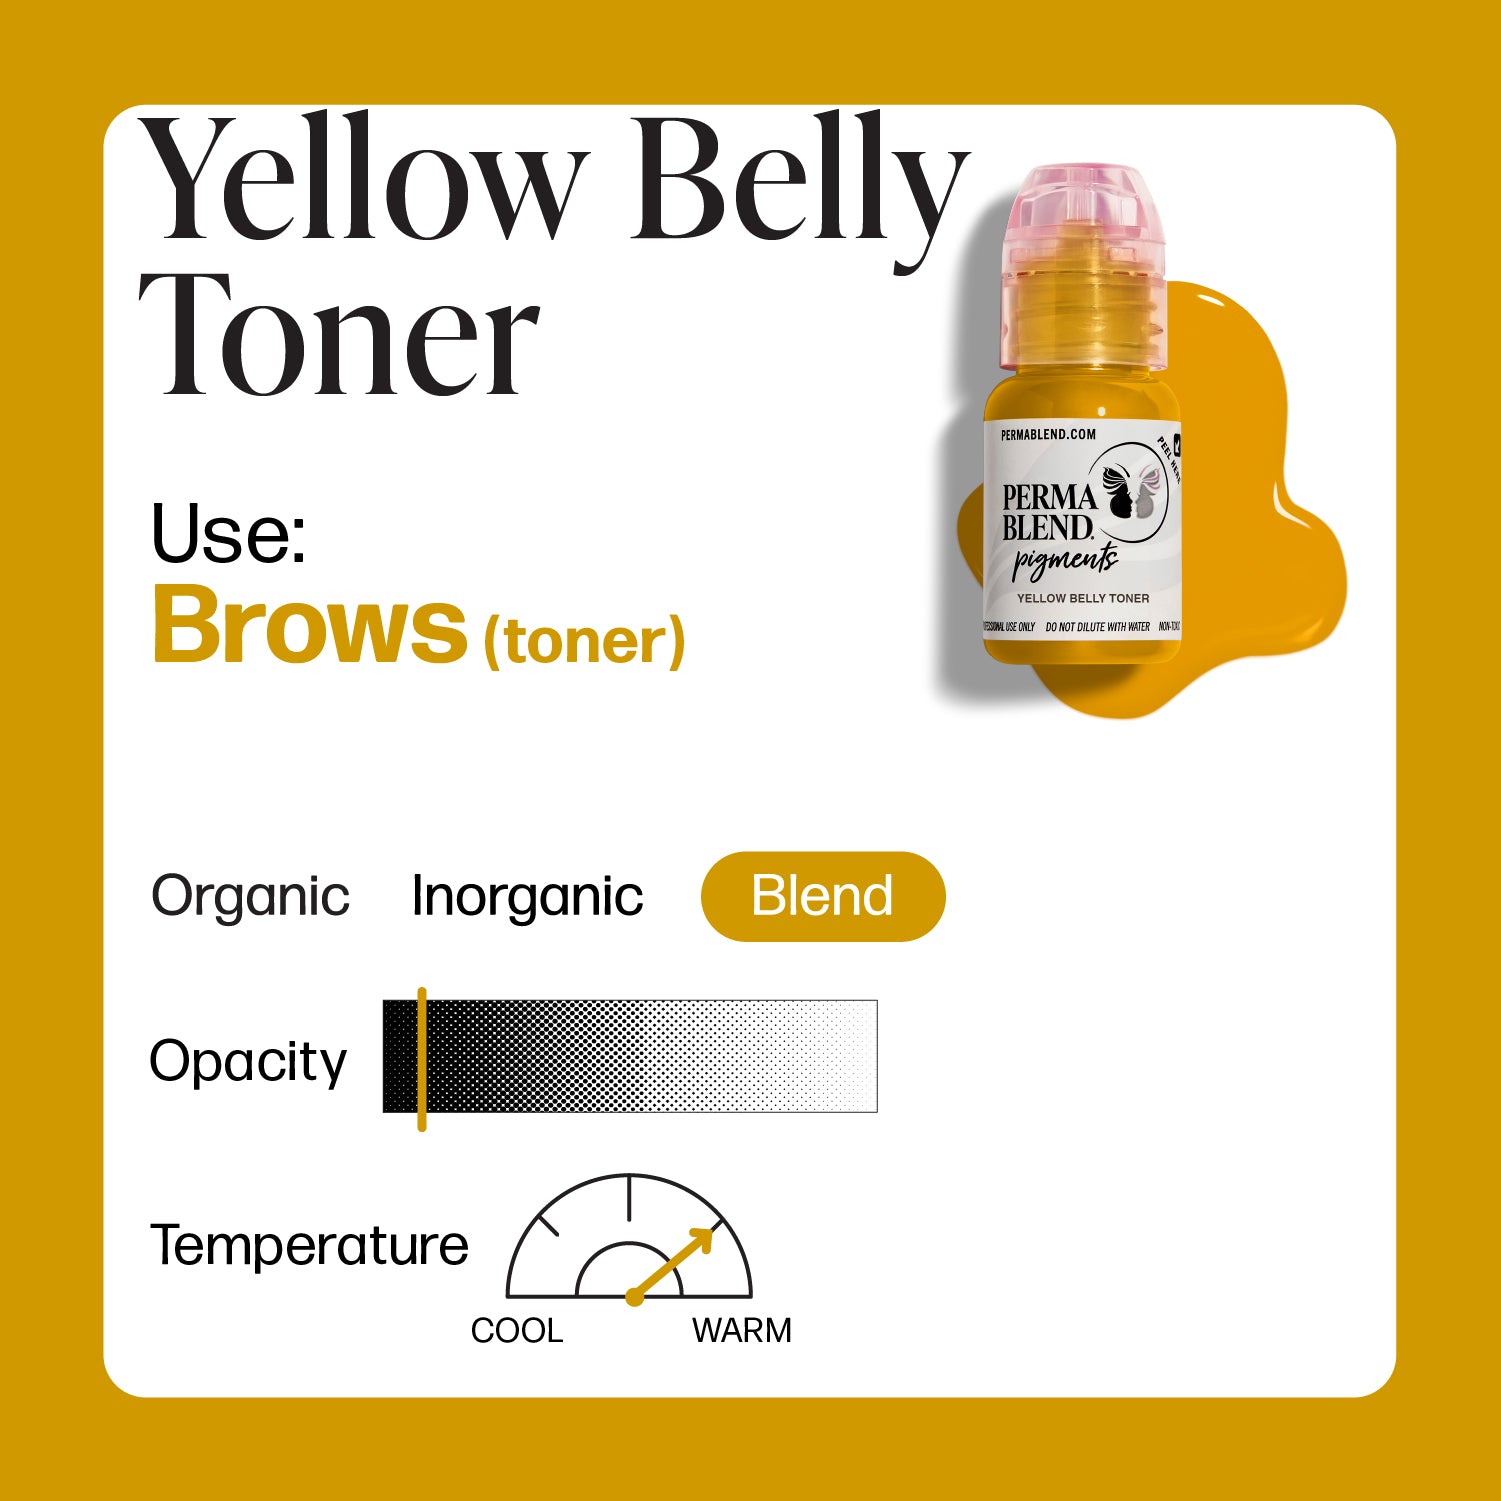 Perma Blend - Yellow Belly Toner